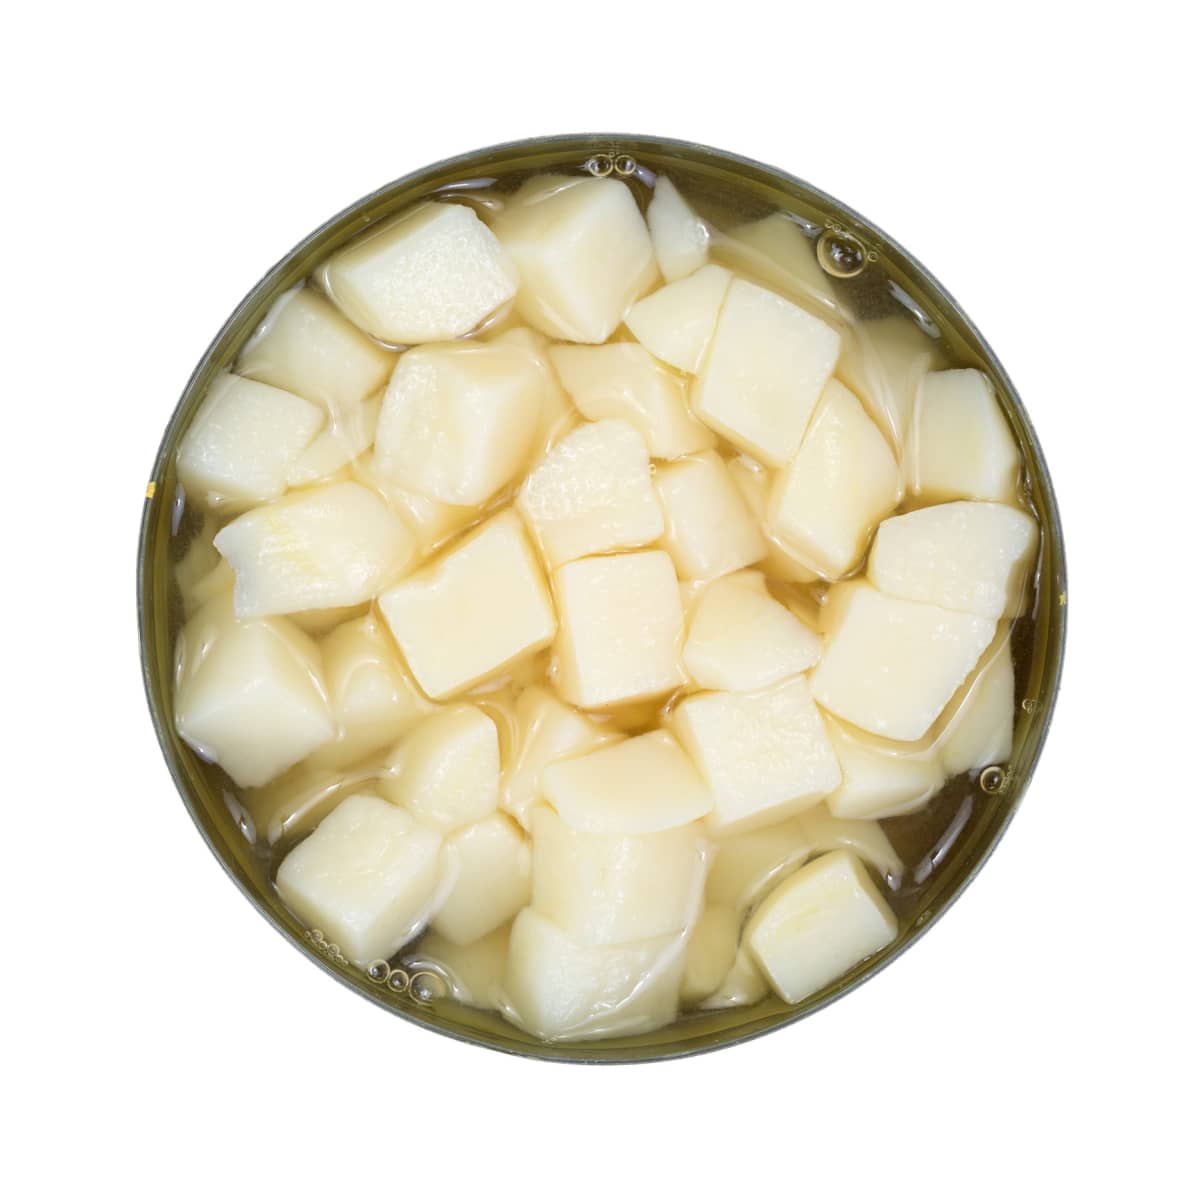 potatoes peeled in a tin can on a white background